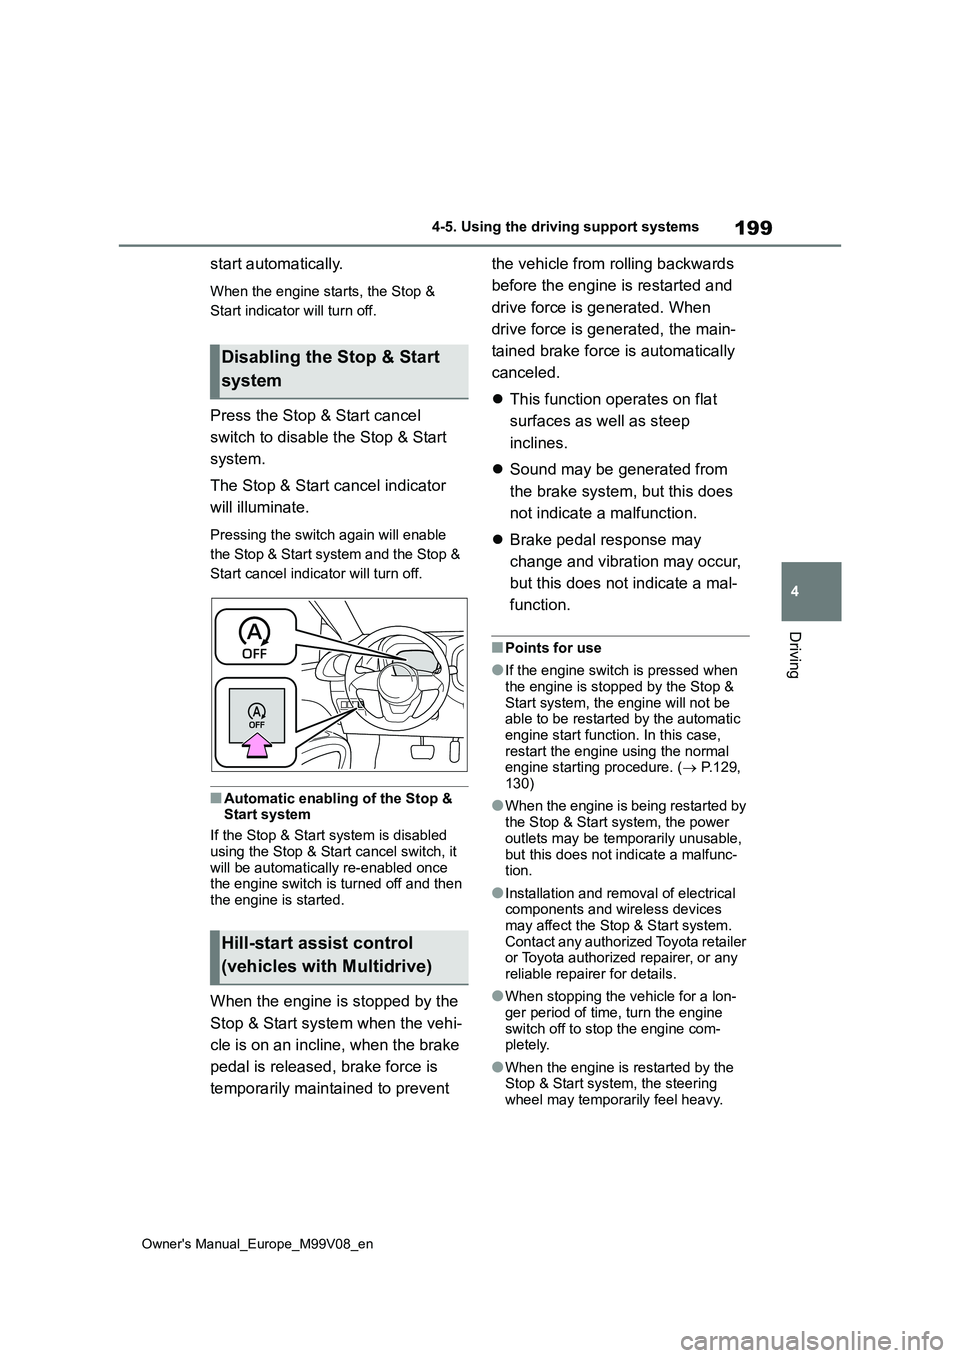 TOYOTA AYGO X 2022  Owners Manual (in English) 199
4
Owner's Manual_Europe_M99V08_en
4-5. Using the driving support systems
Driving
start automatically.
When the engine starts, the Stop &  
Start indicator will turn off.
Press the Stop & Start